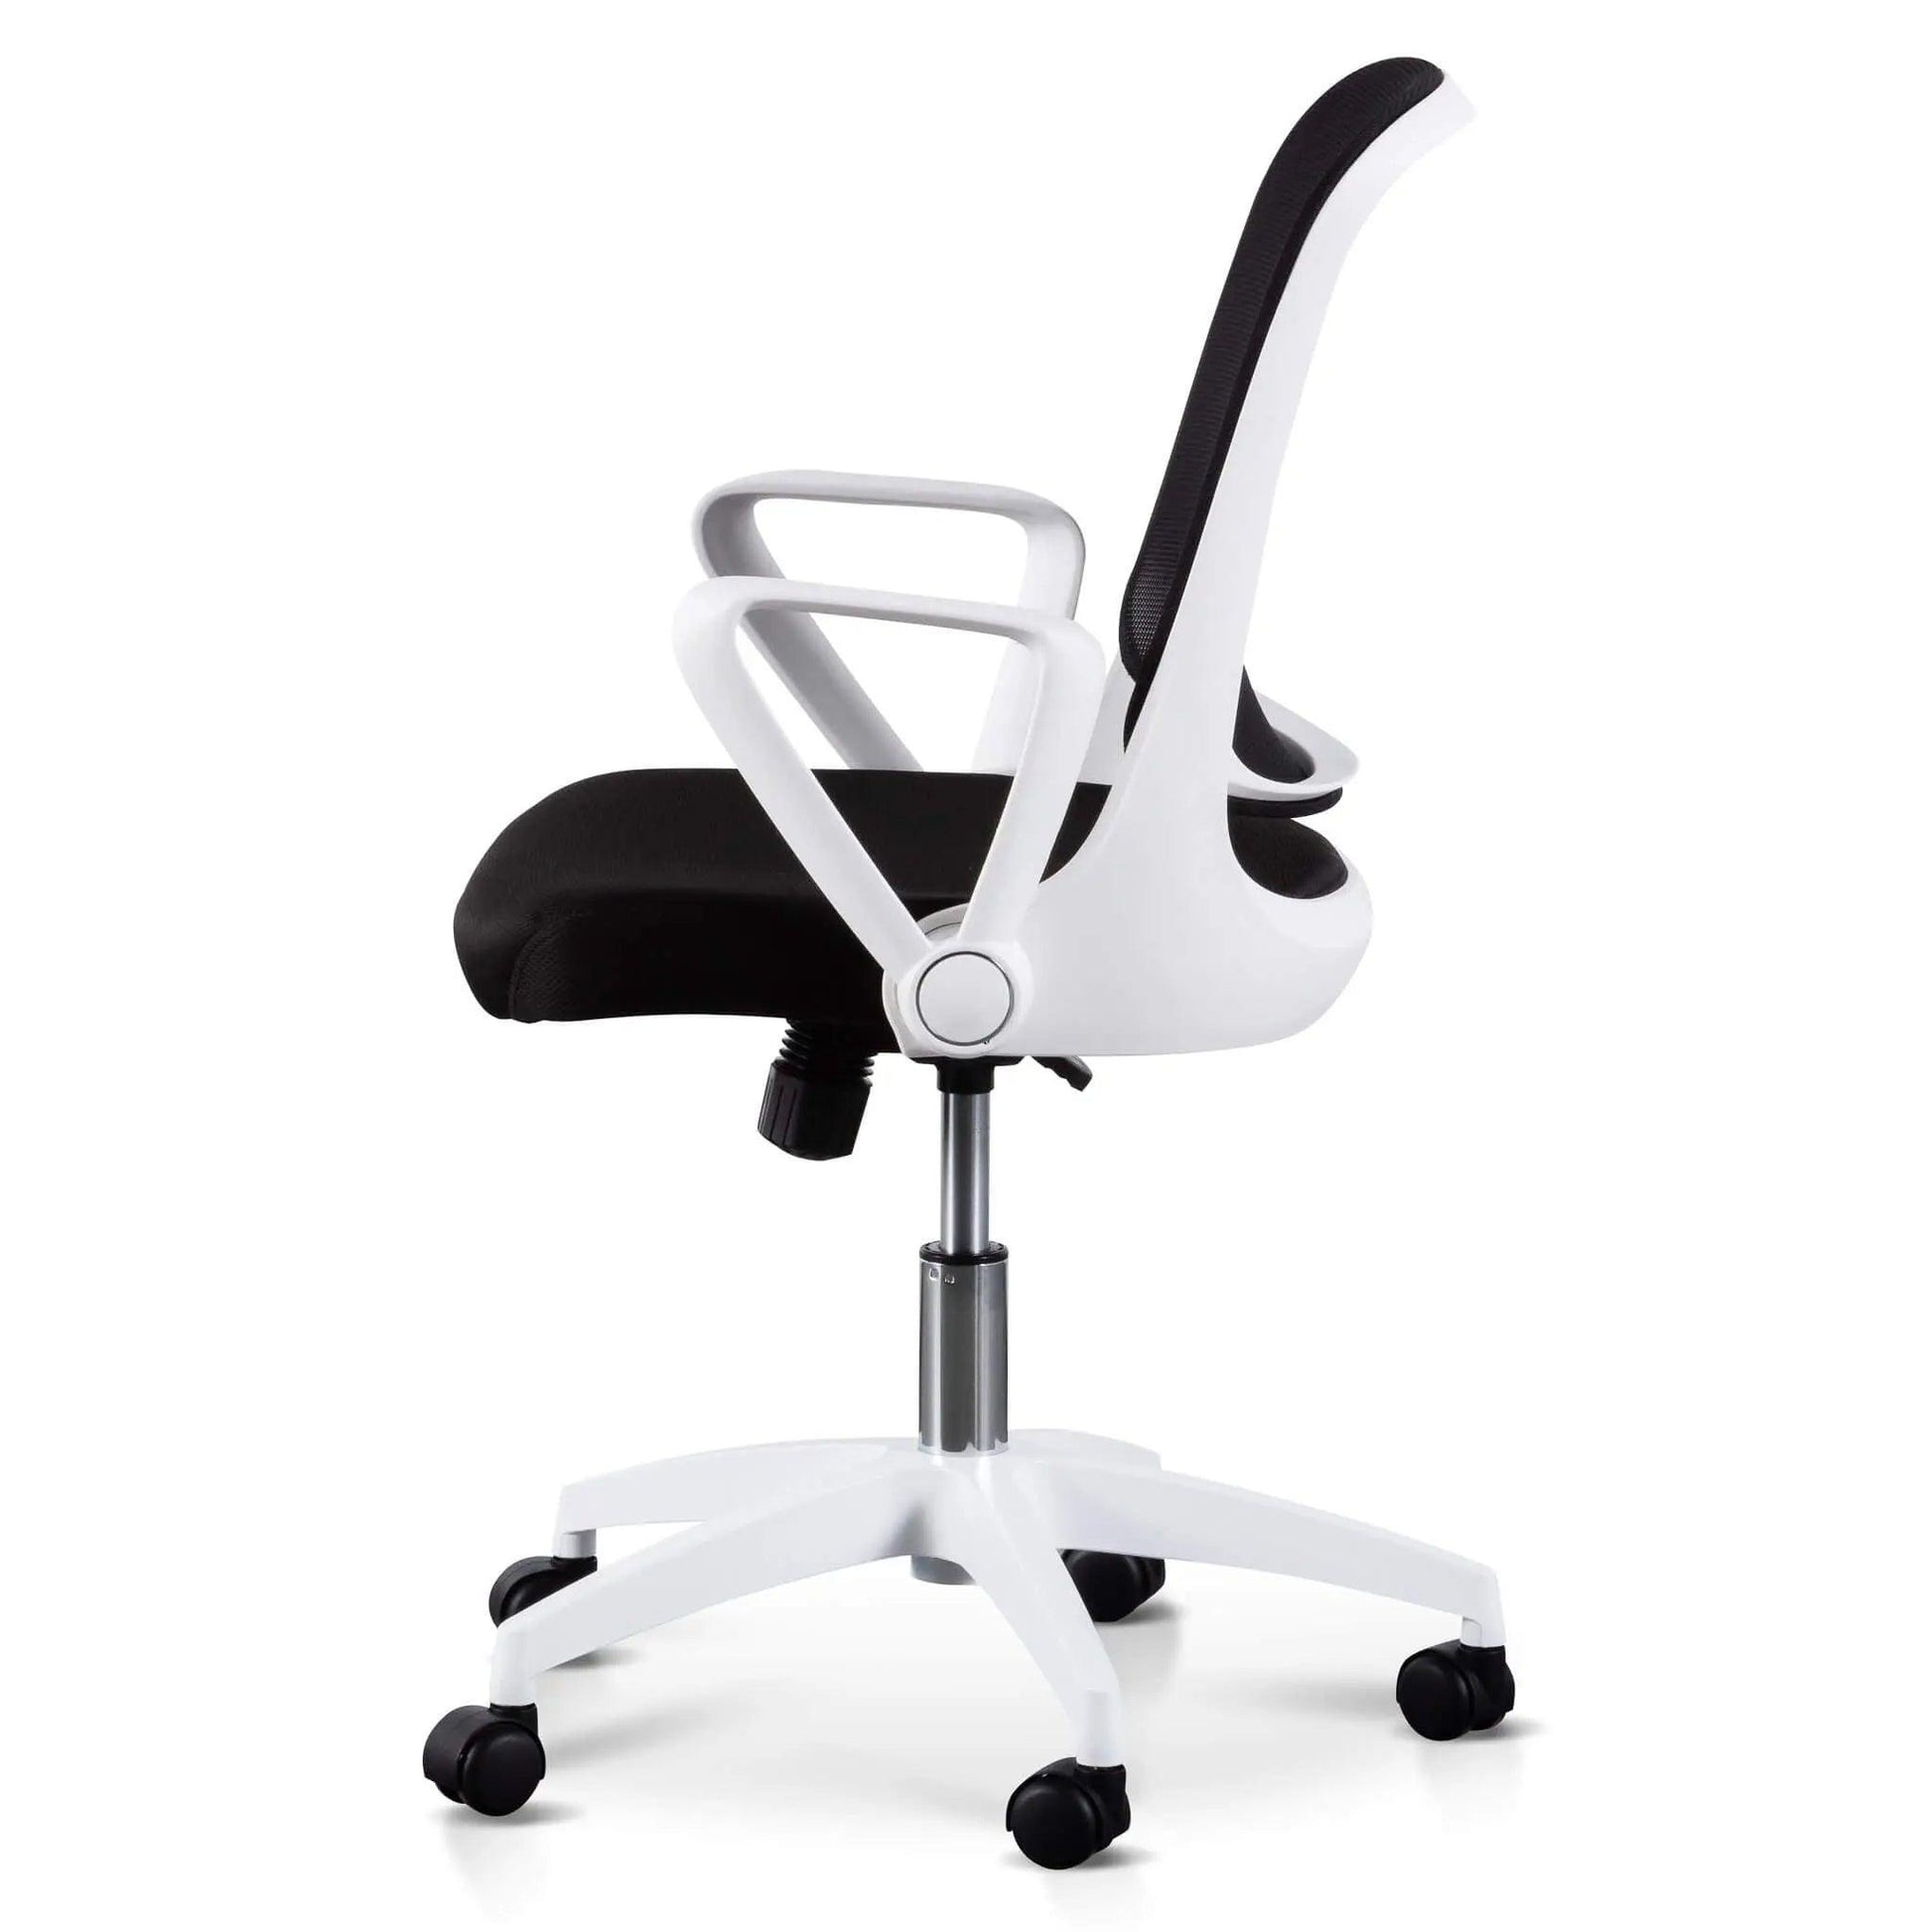 Calibre Black Office Chair - White Arm and Base OC6190-LF - Office/Gaming ChairsOC6190-LF 5